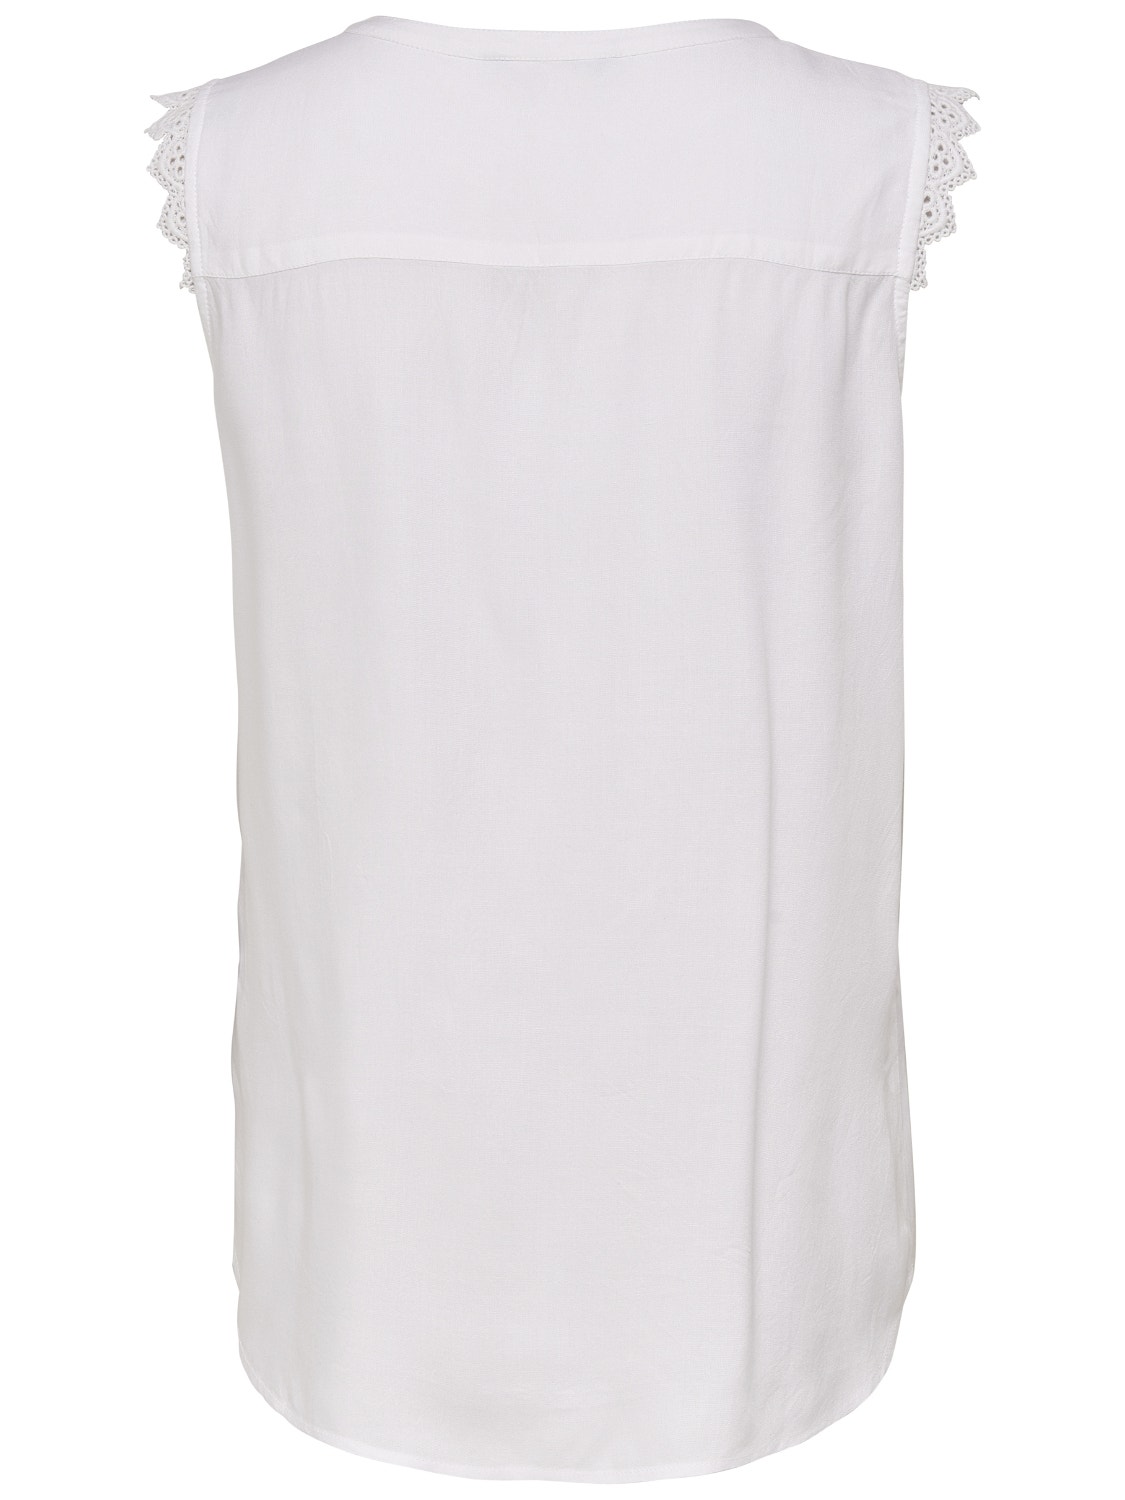 ONLY Avec finitions Top sans manches -White - 15157656